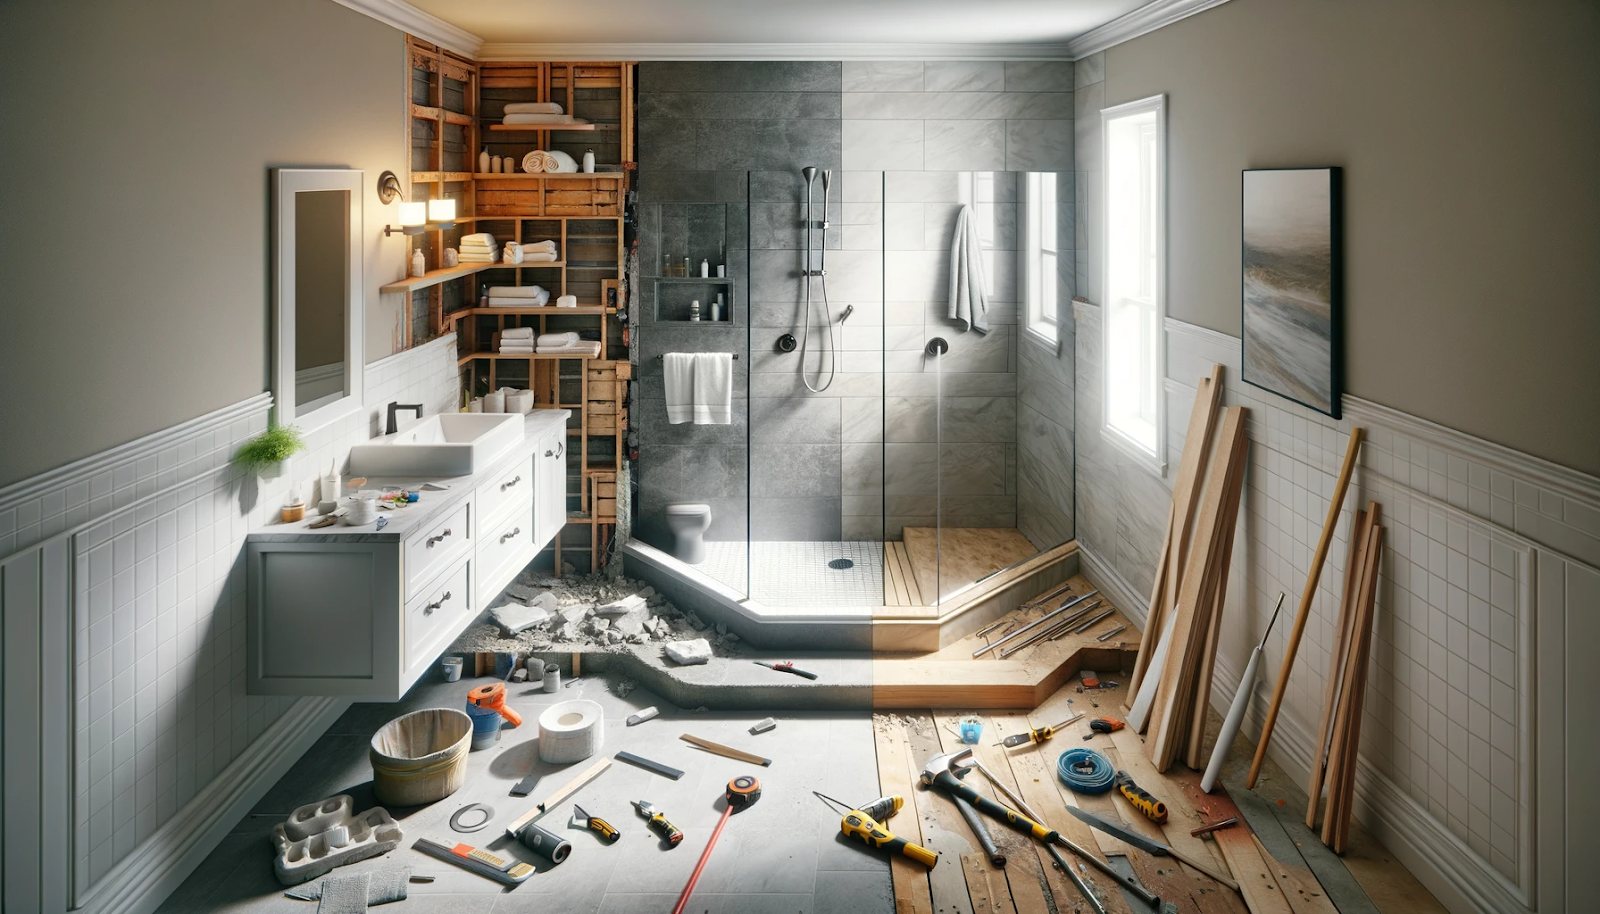 Bathroom Remodeling Tips for Maximum Efficiency and Style